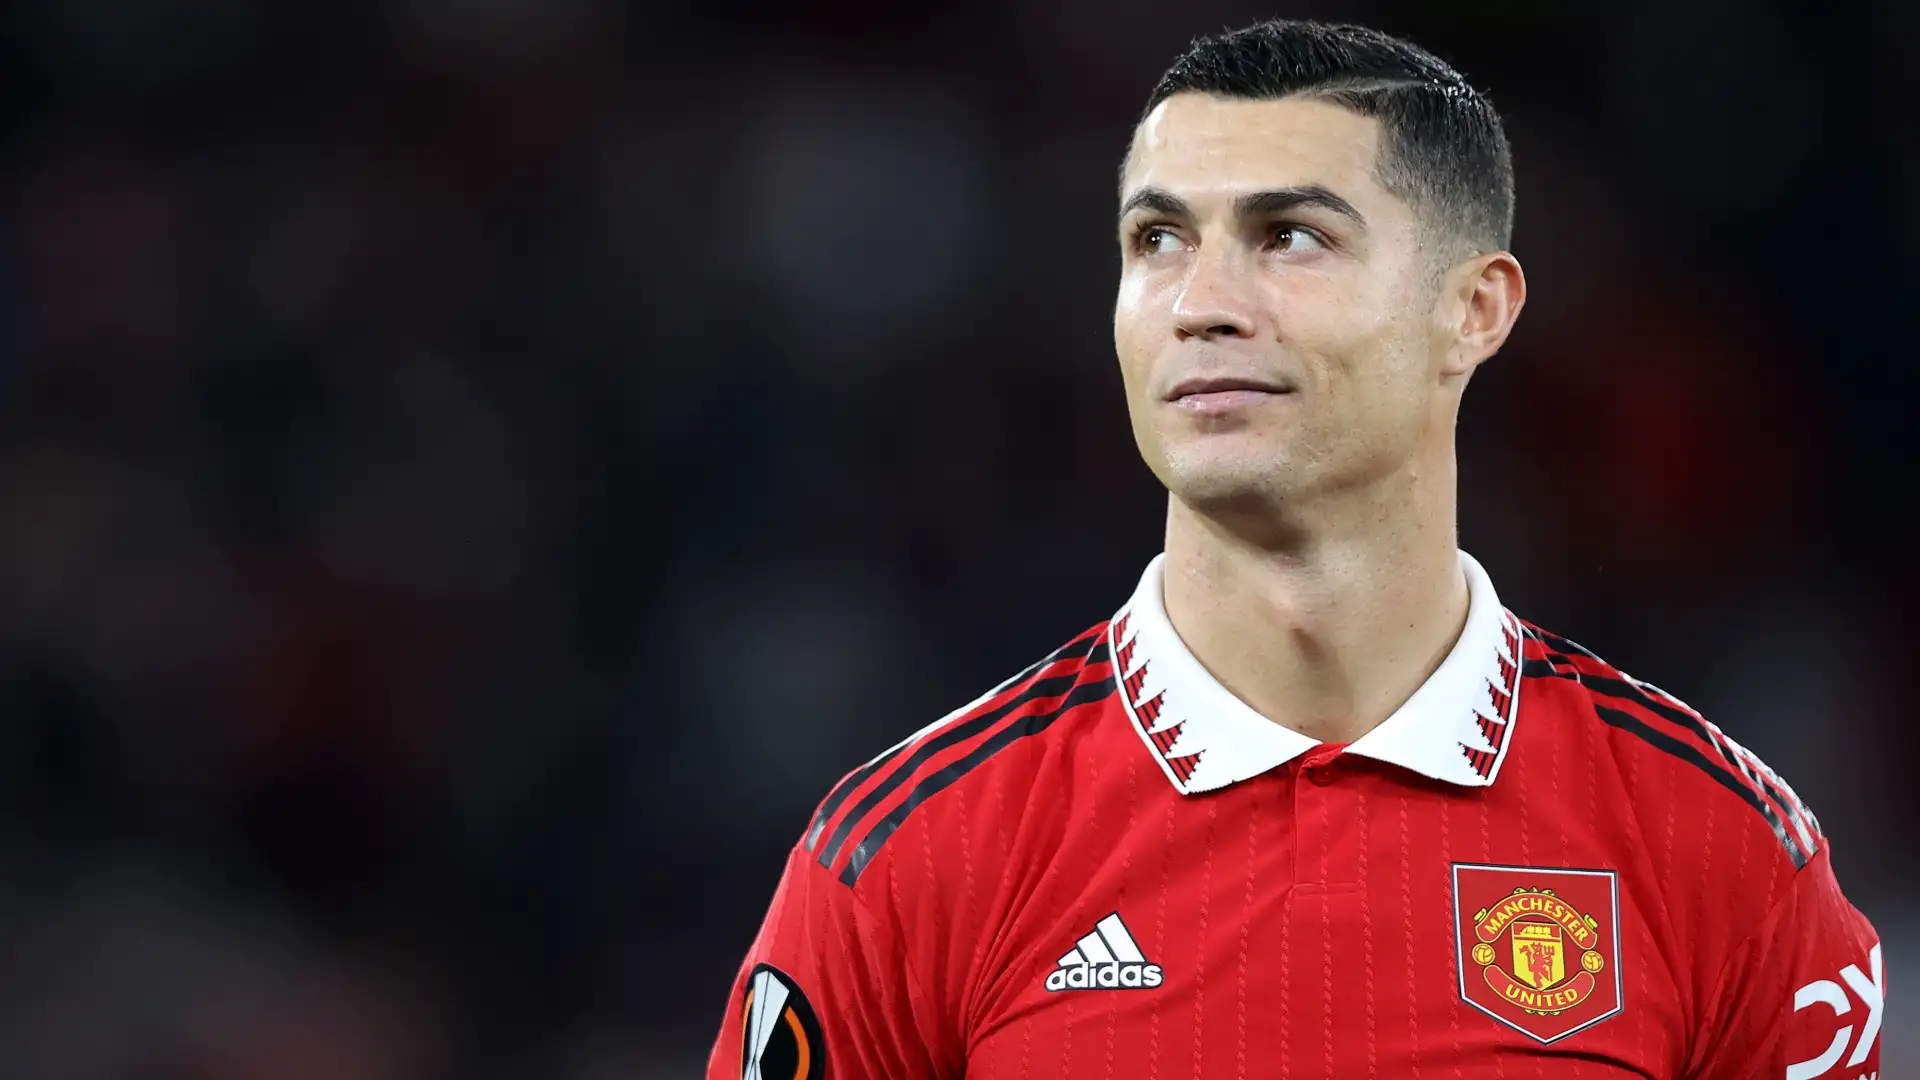 Revealed: Man Utd star agreed contract to sit on the bench because of Cristiano Ronaldo – but Premier League title dream turned sour